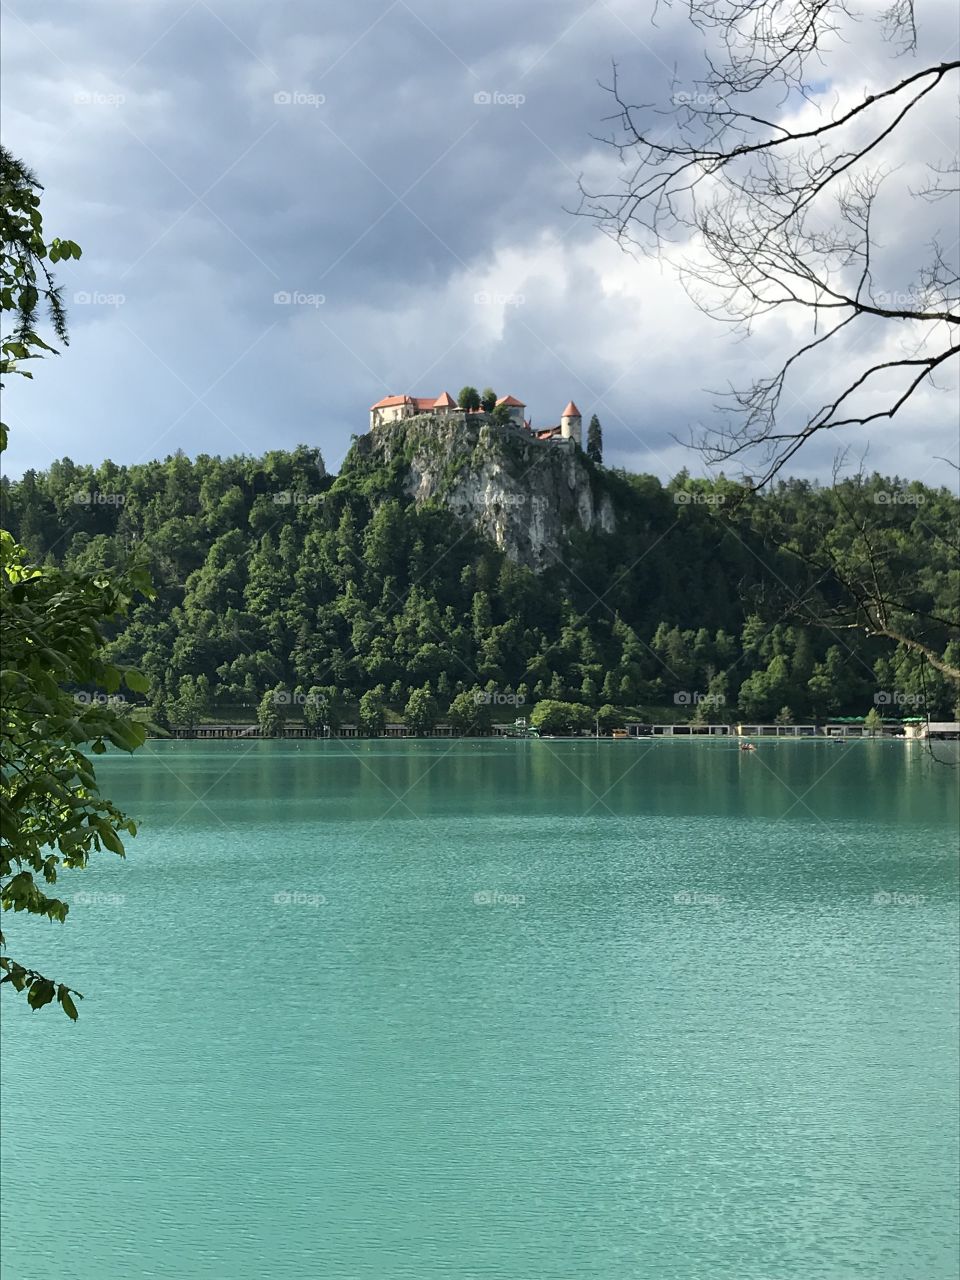 Magical fairytale castle on mountain top looking over pristine glacial Lake Bled. Fairytale scene. Dramatic sky. Magical nature.